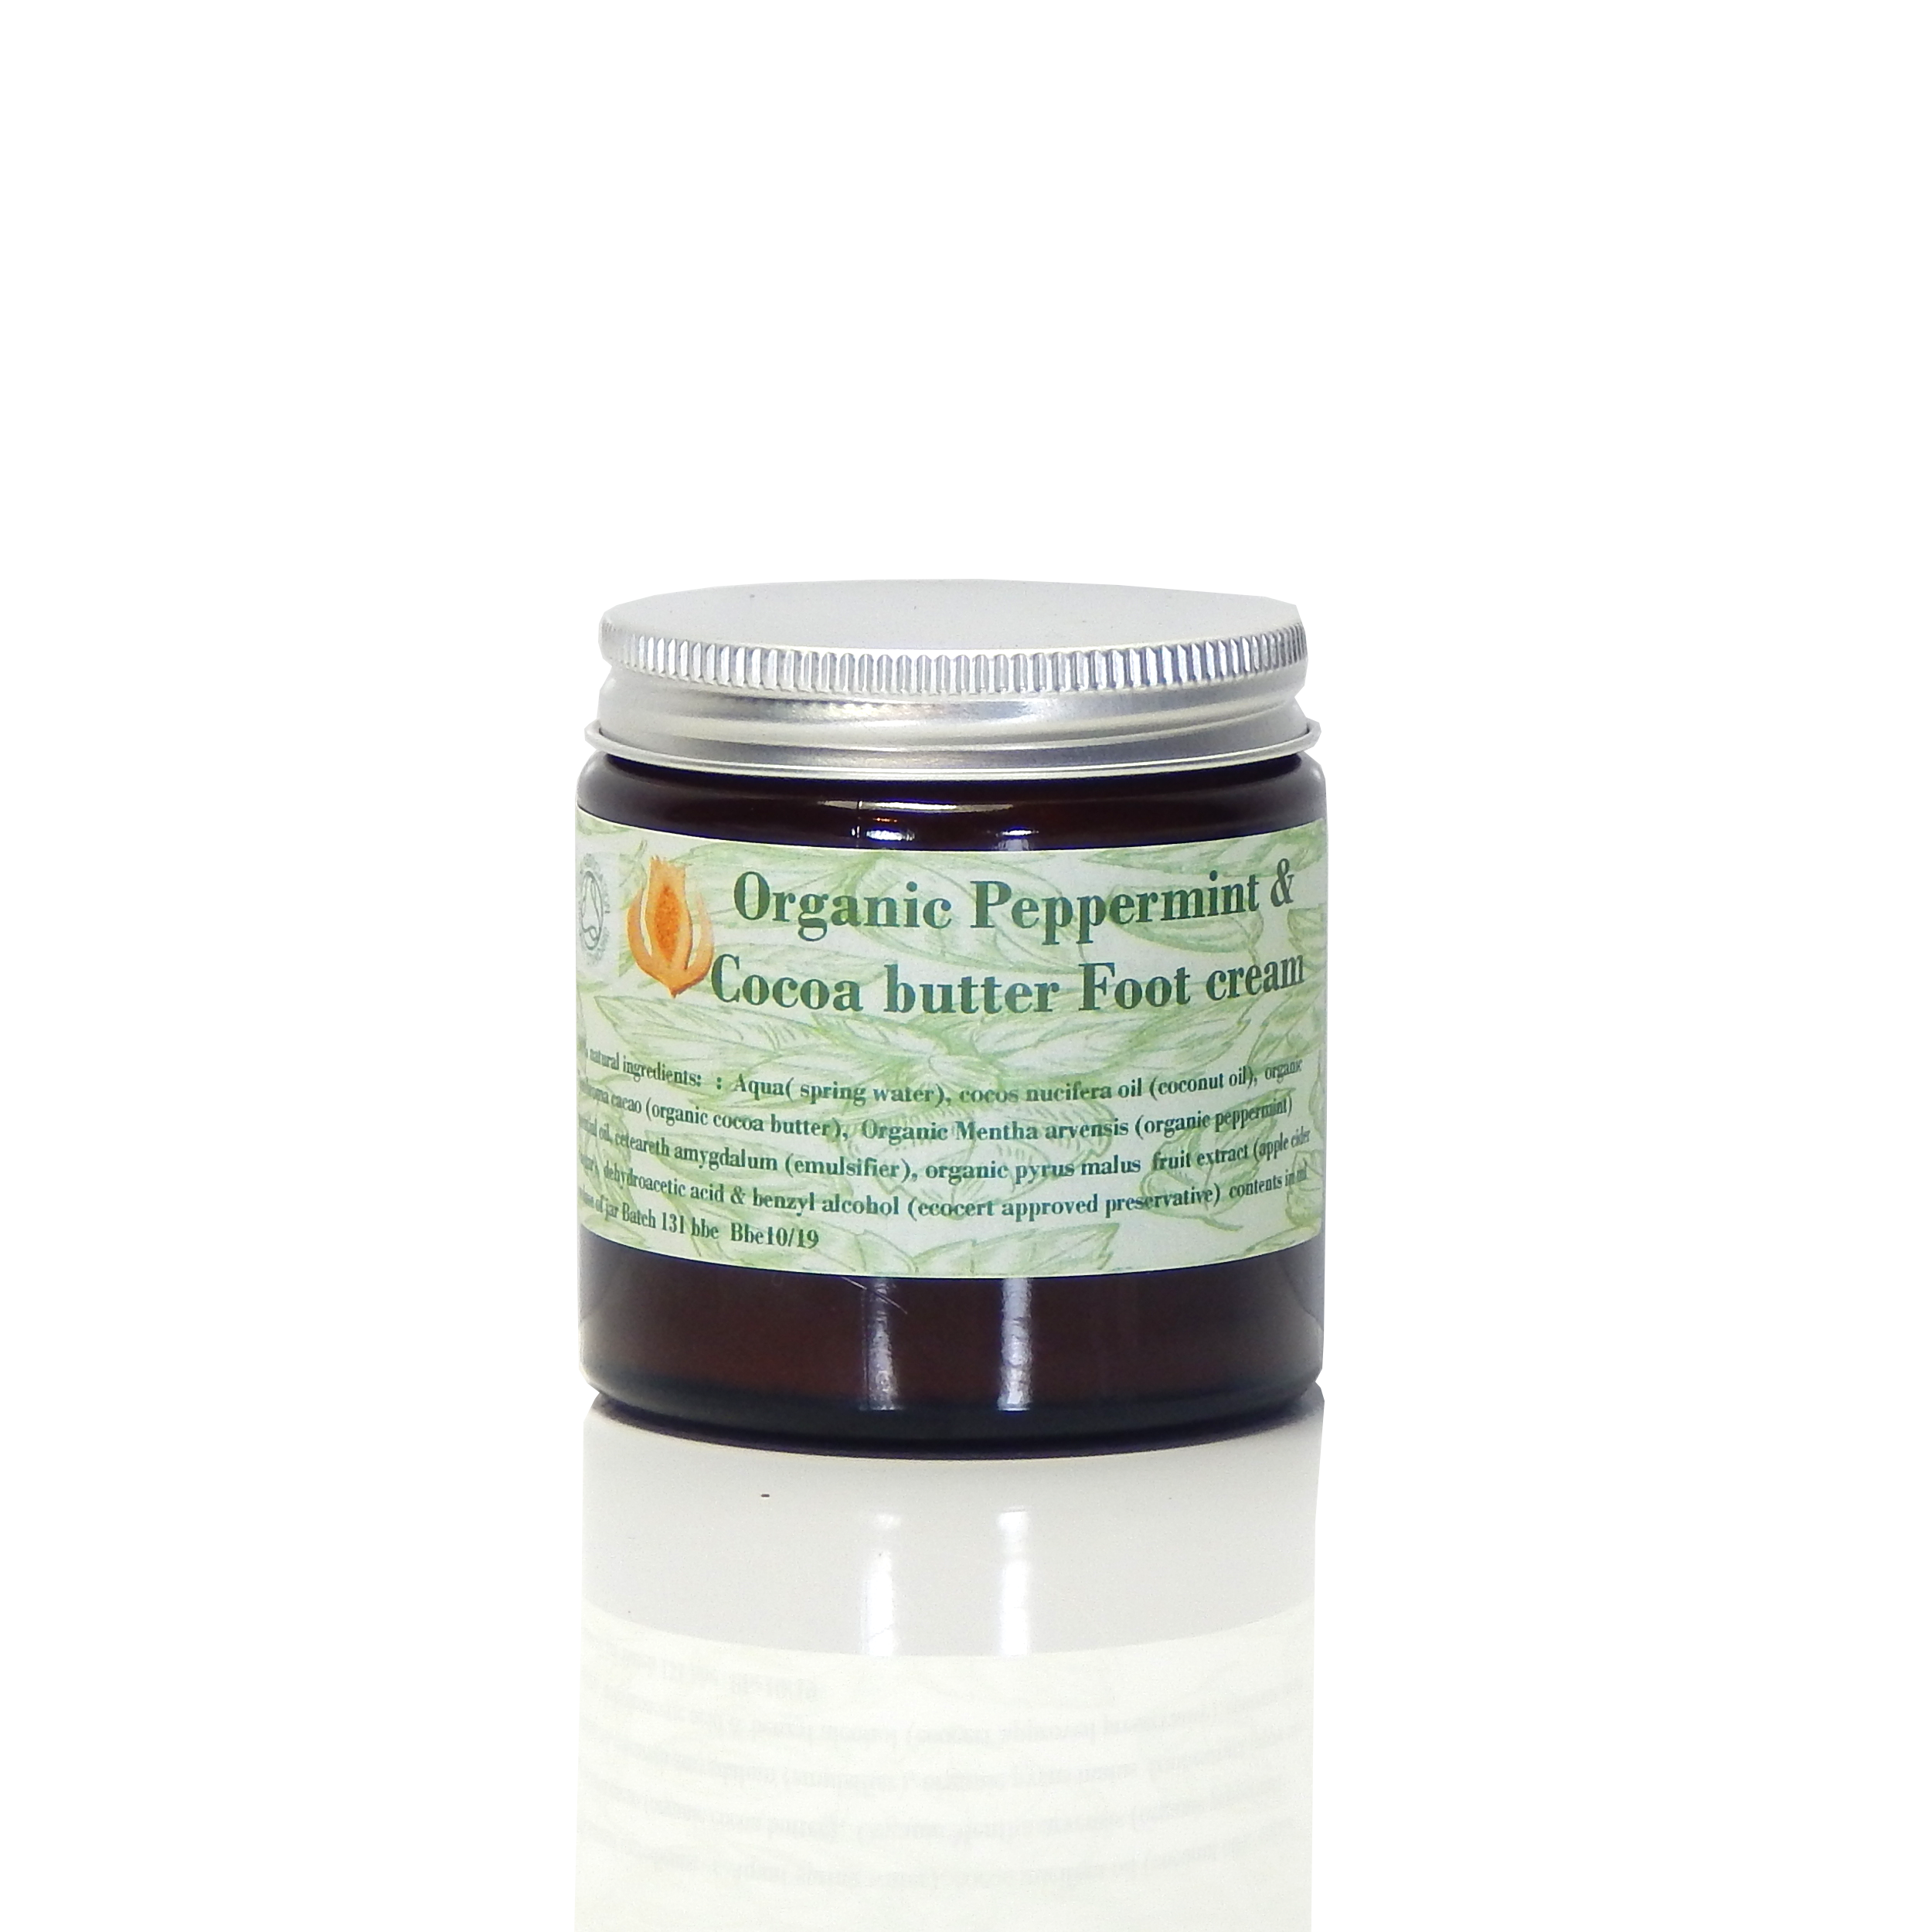 PEPPERMINT & COCOA BUTTER FOOT CREAM